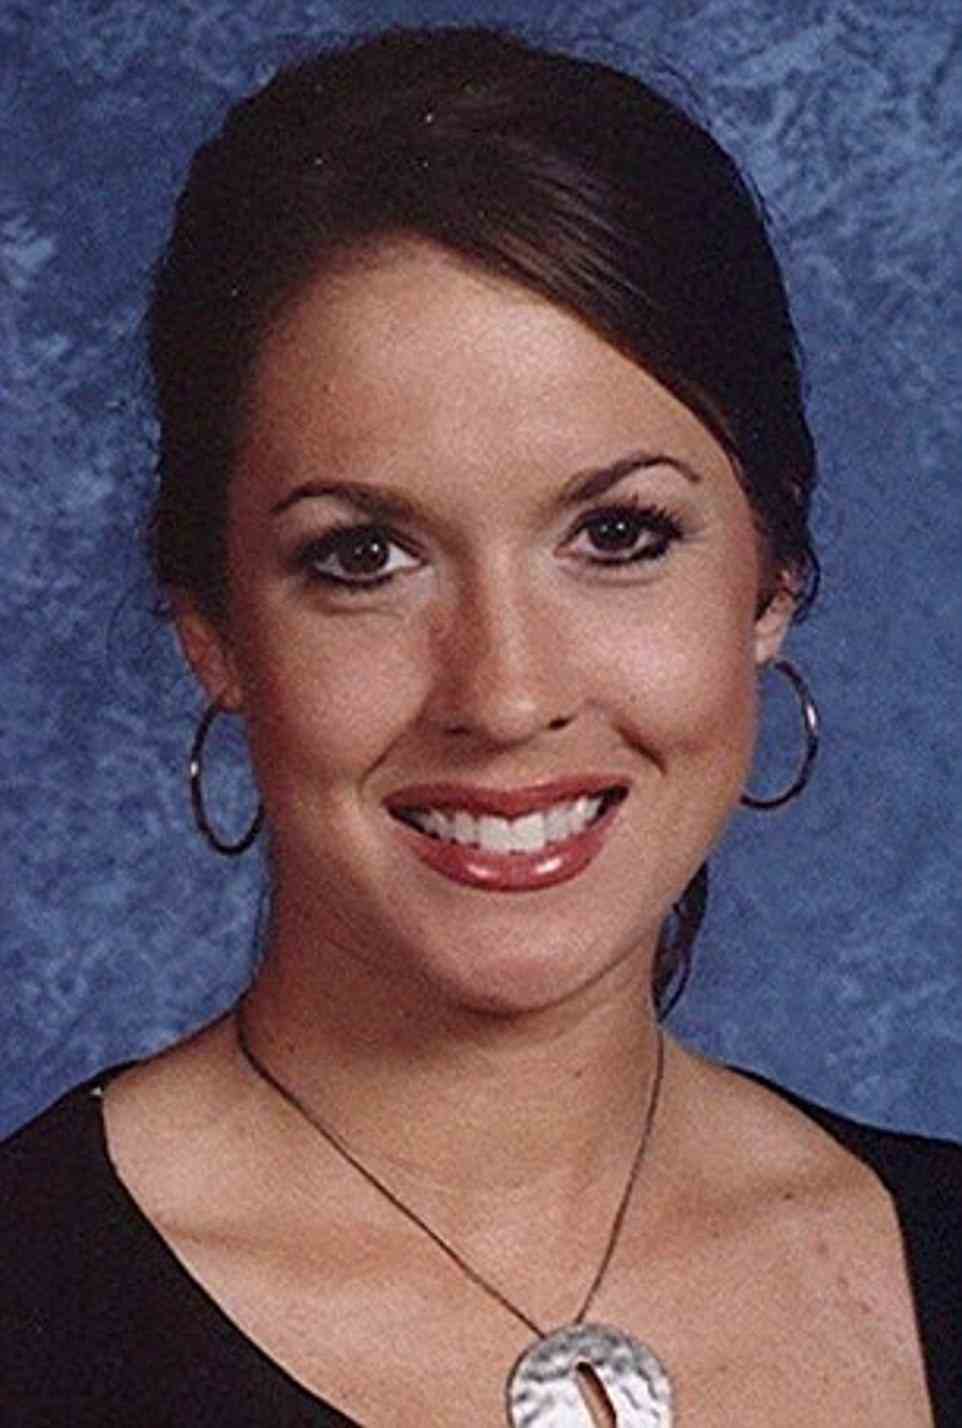 The former beauty queen disappeared from her Ocilla home in October 2005